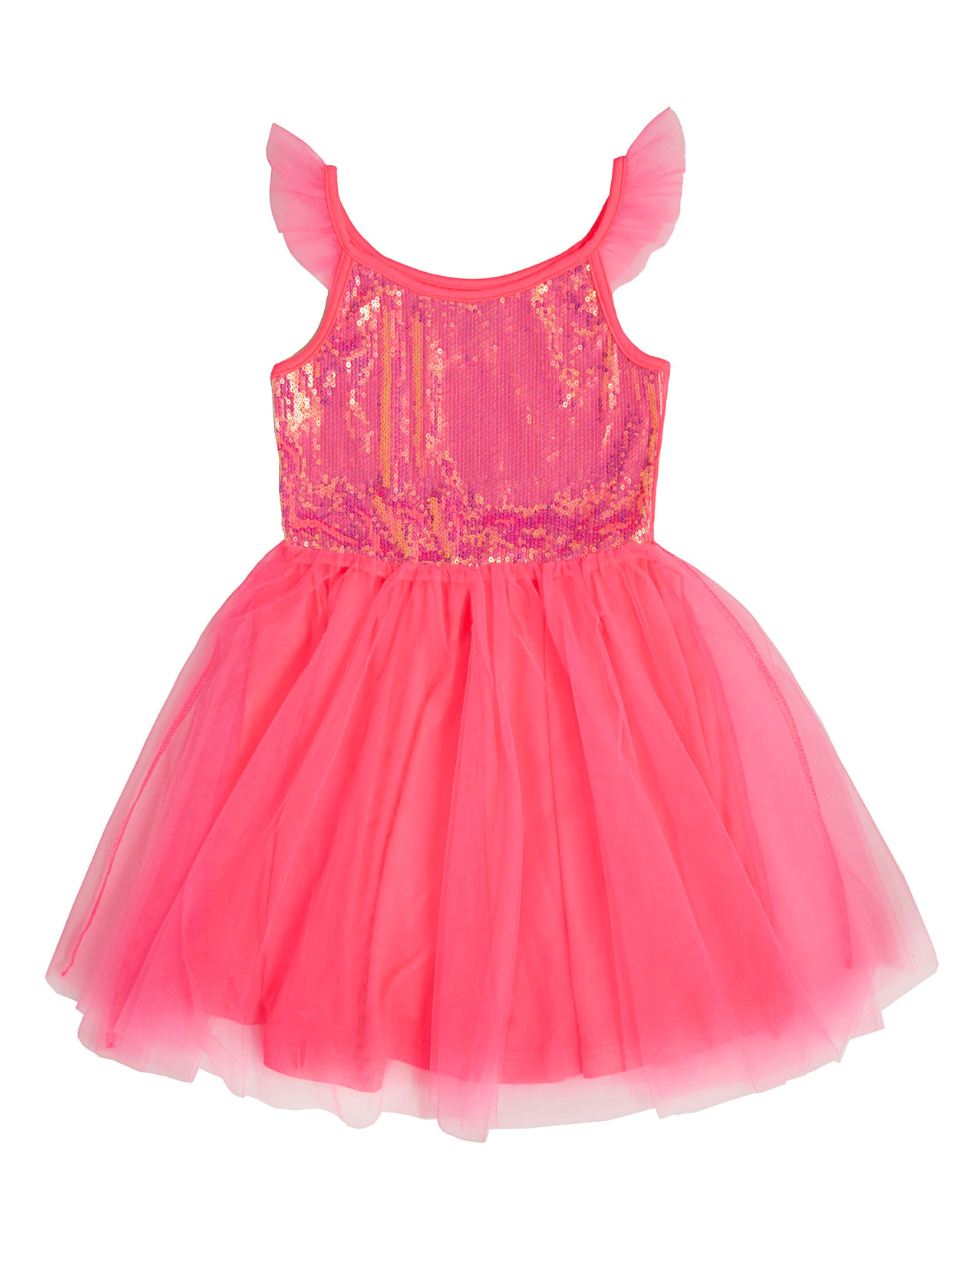 A pink sequin dress with a full tulle skirt.